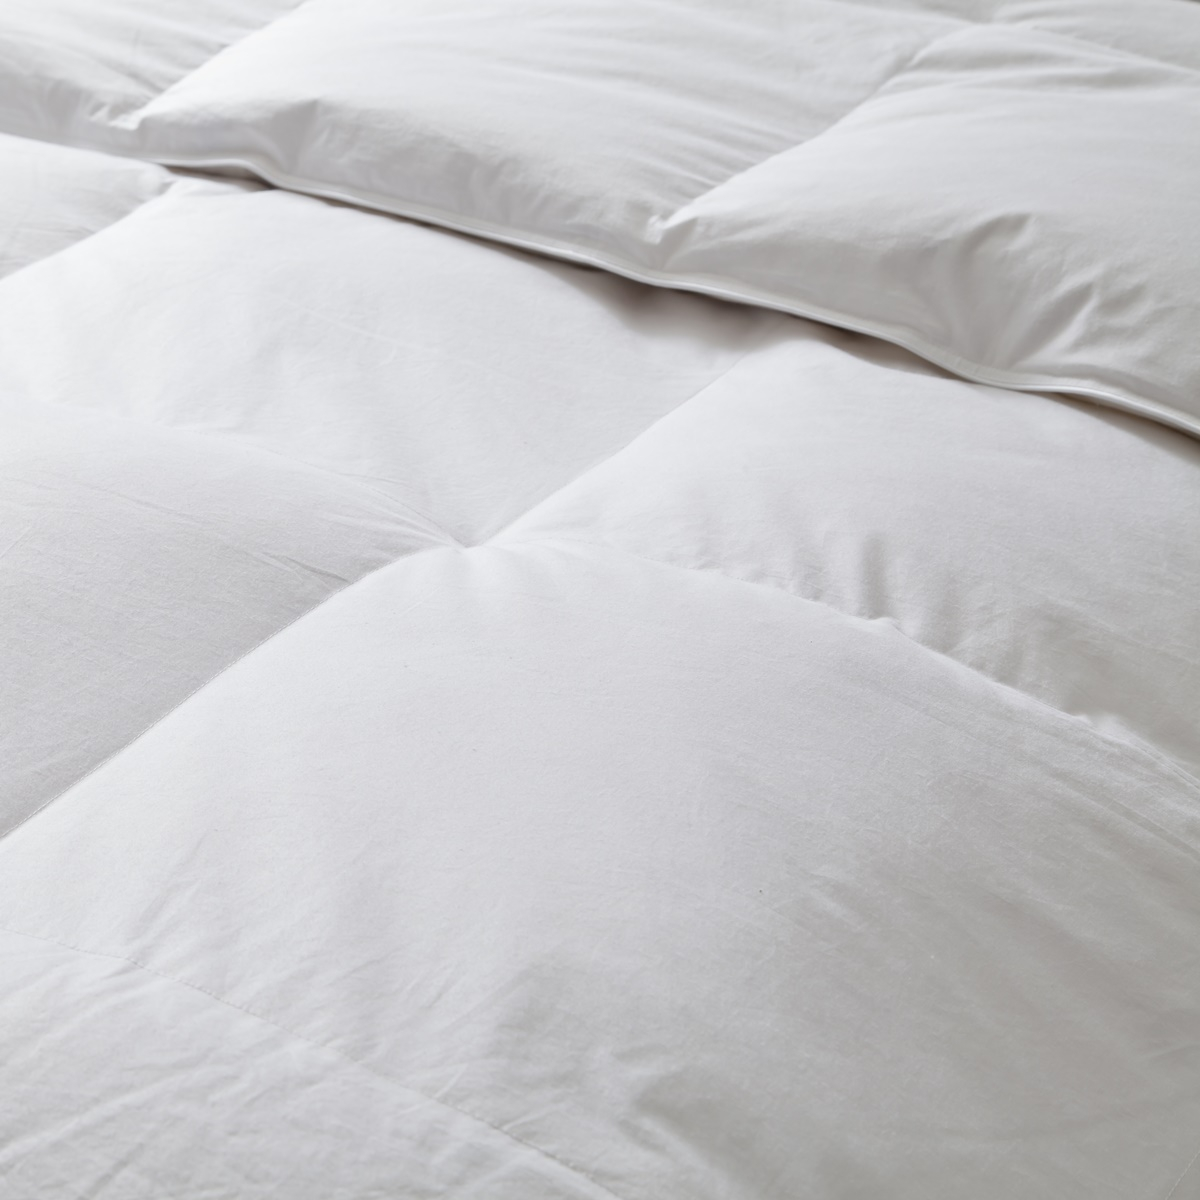 Duvet 90% Goose Down Piping Finish | Bed linen | Tradition des Vosges